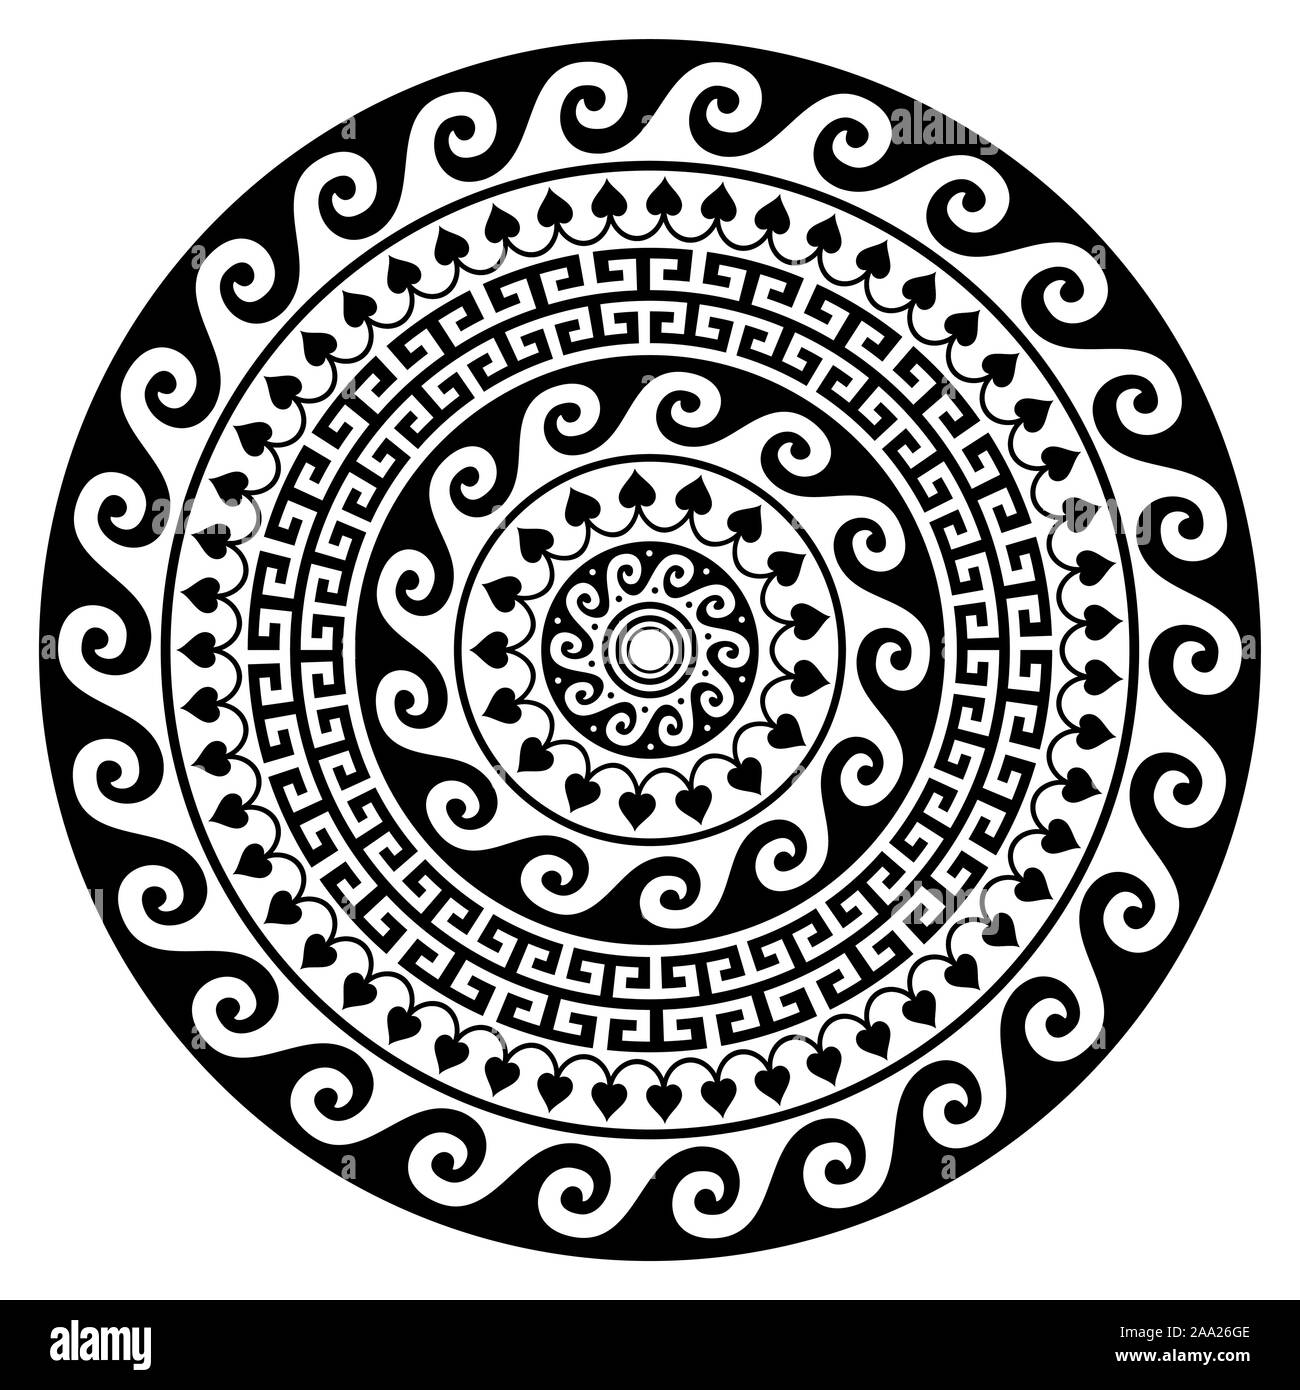 Greek mandala vector design, round key pattern inspired by an art from ancient Greece in black and white Stock Vector